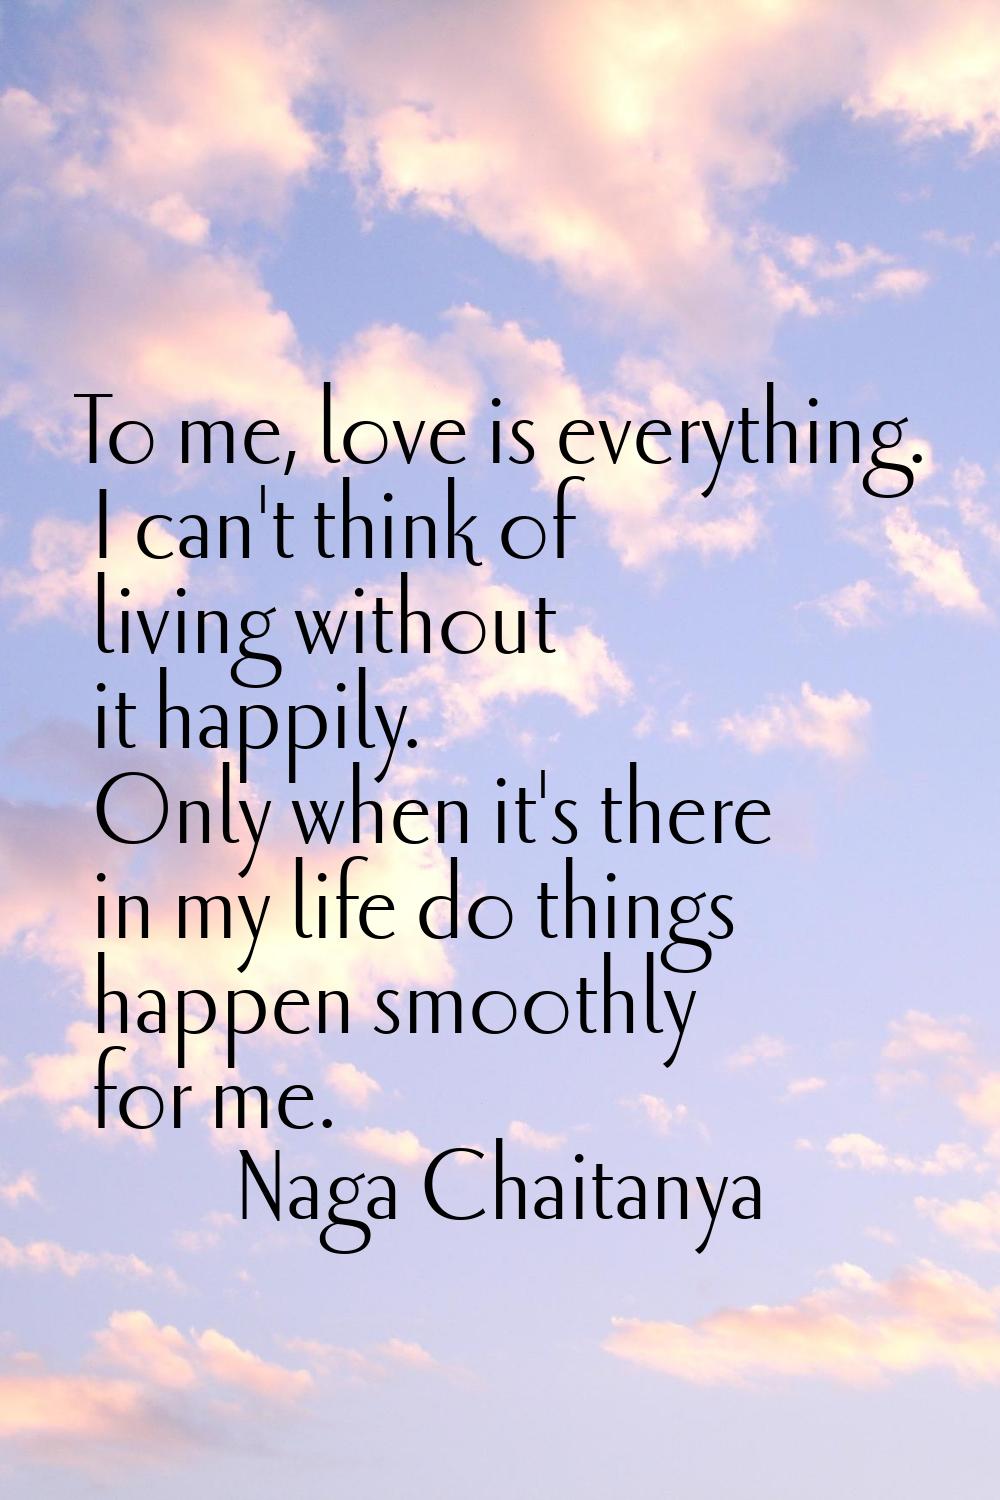 To me, love is everything. I can't think of living without it happily. Only when it's there in my l